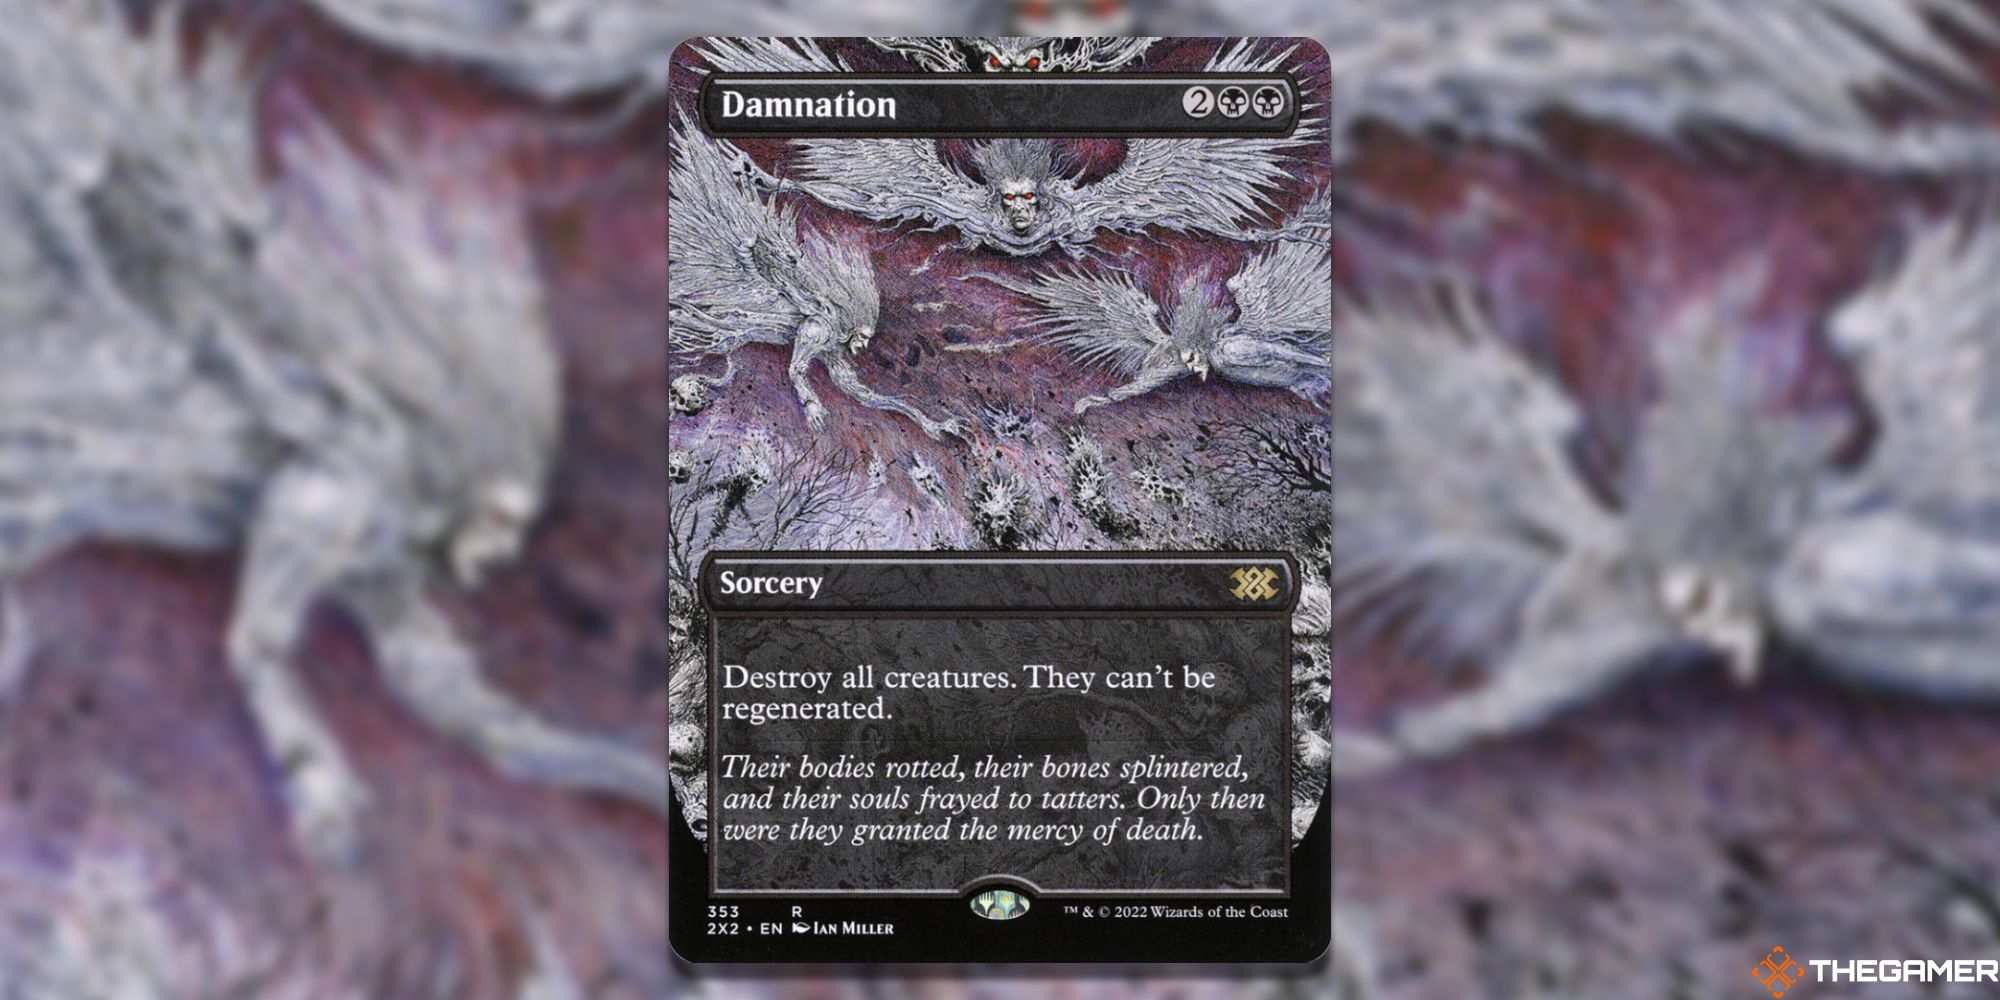 The card Damnation from Magic: The Gathering.